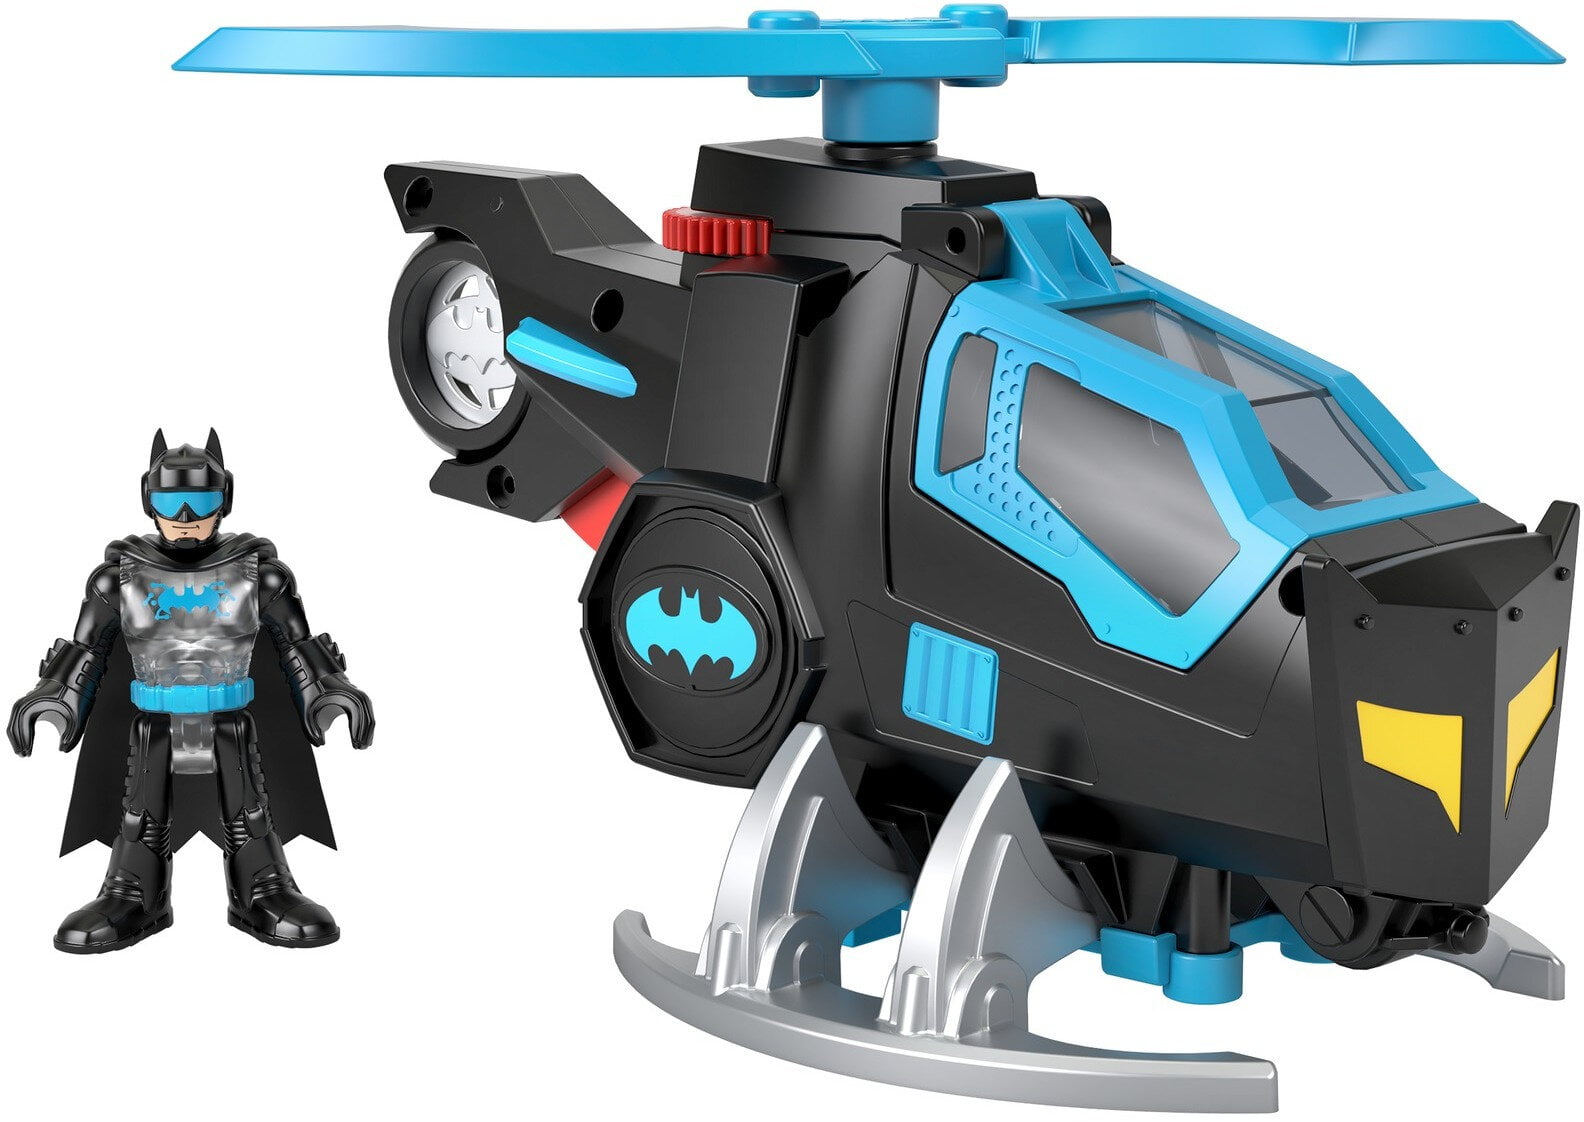 Fisher-Price Imaginext Gotham City Tower Blue bat cycle drone NEW Batman Streets 